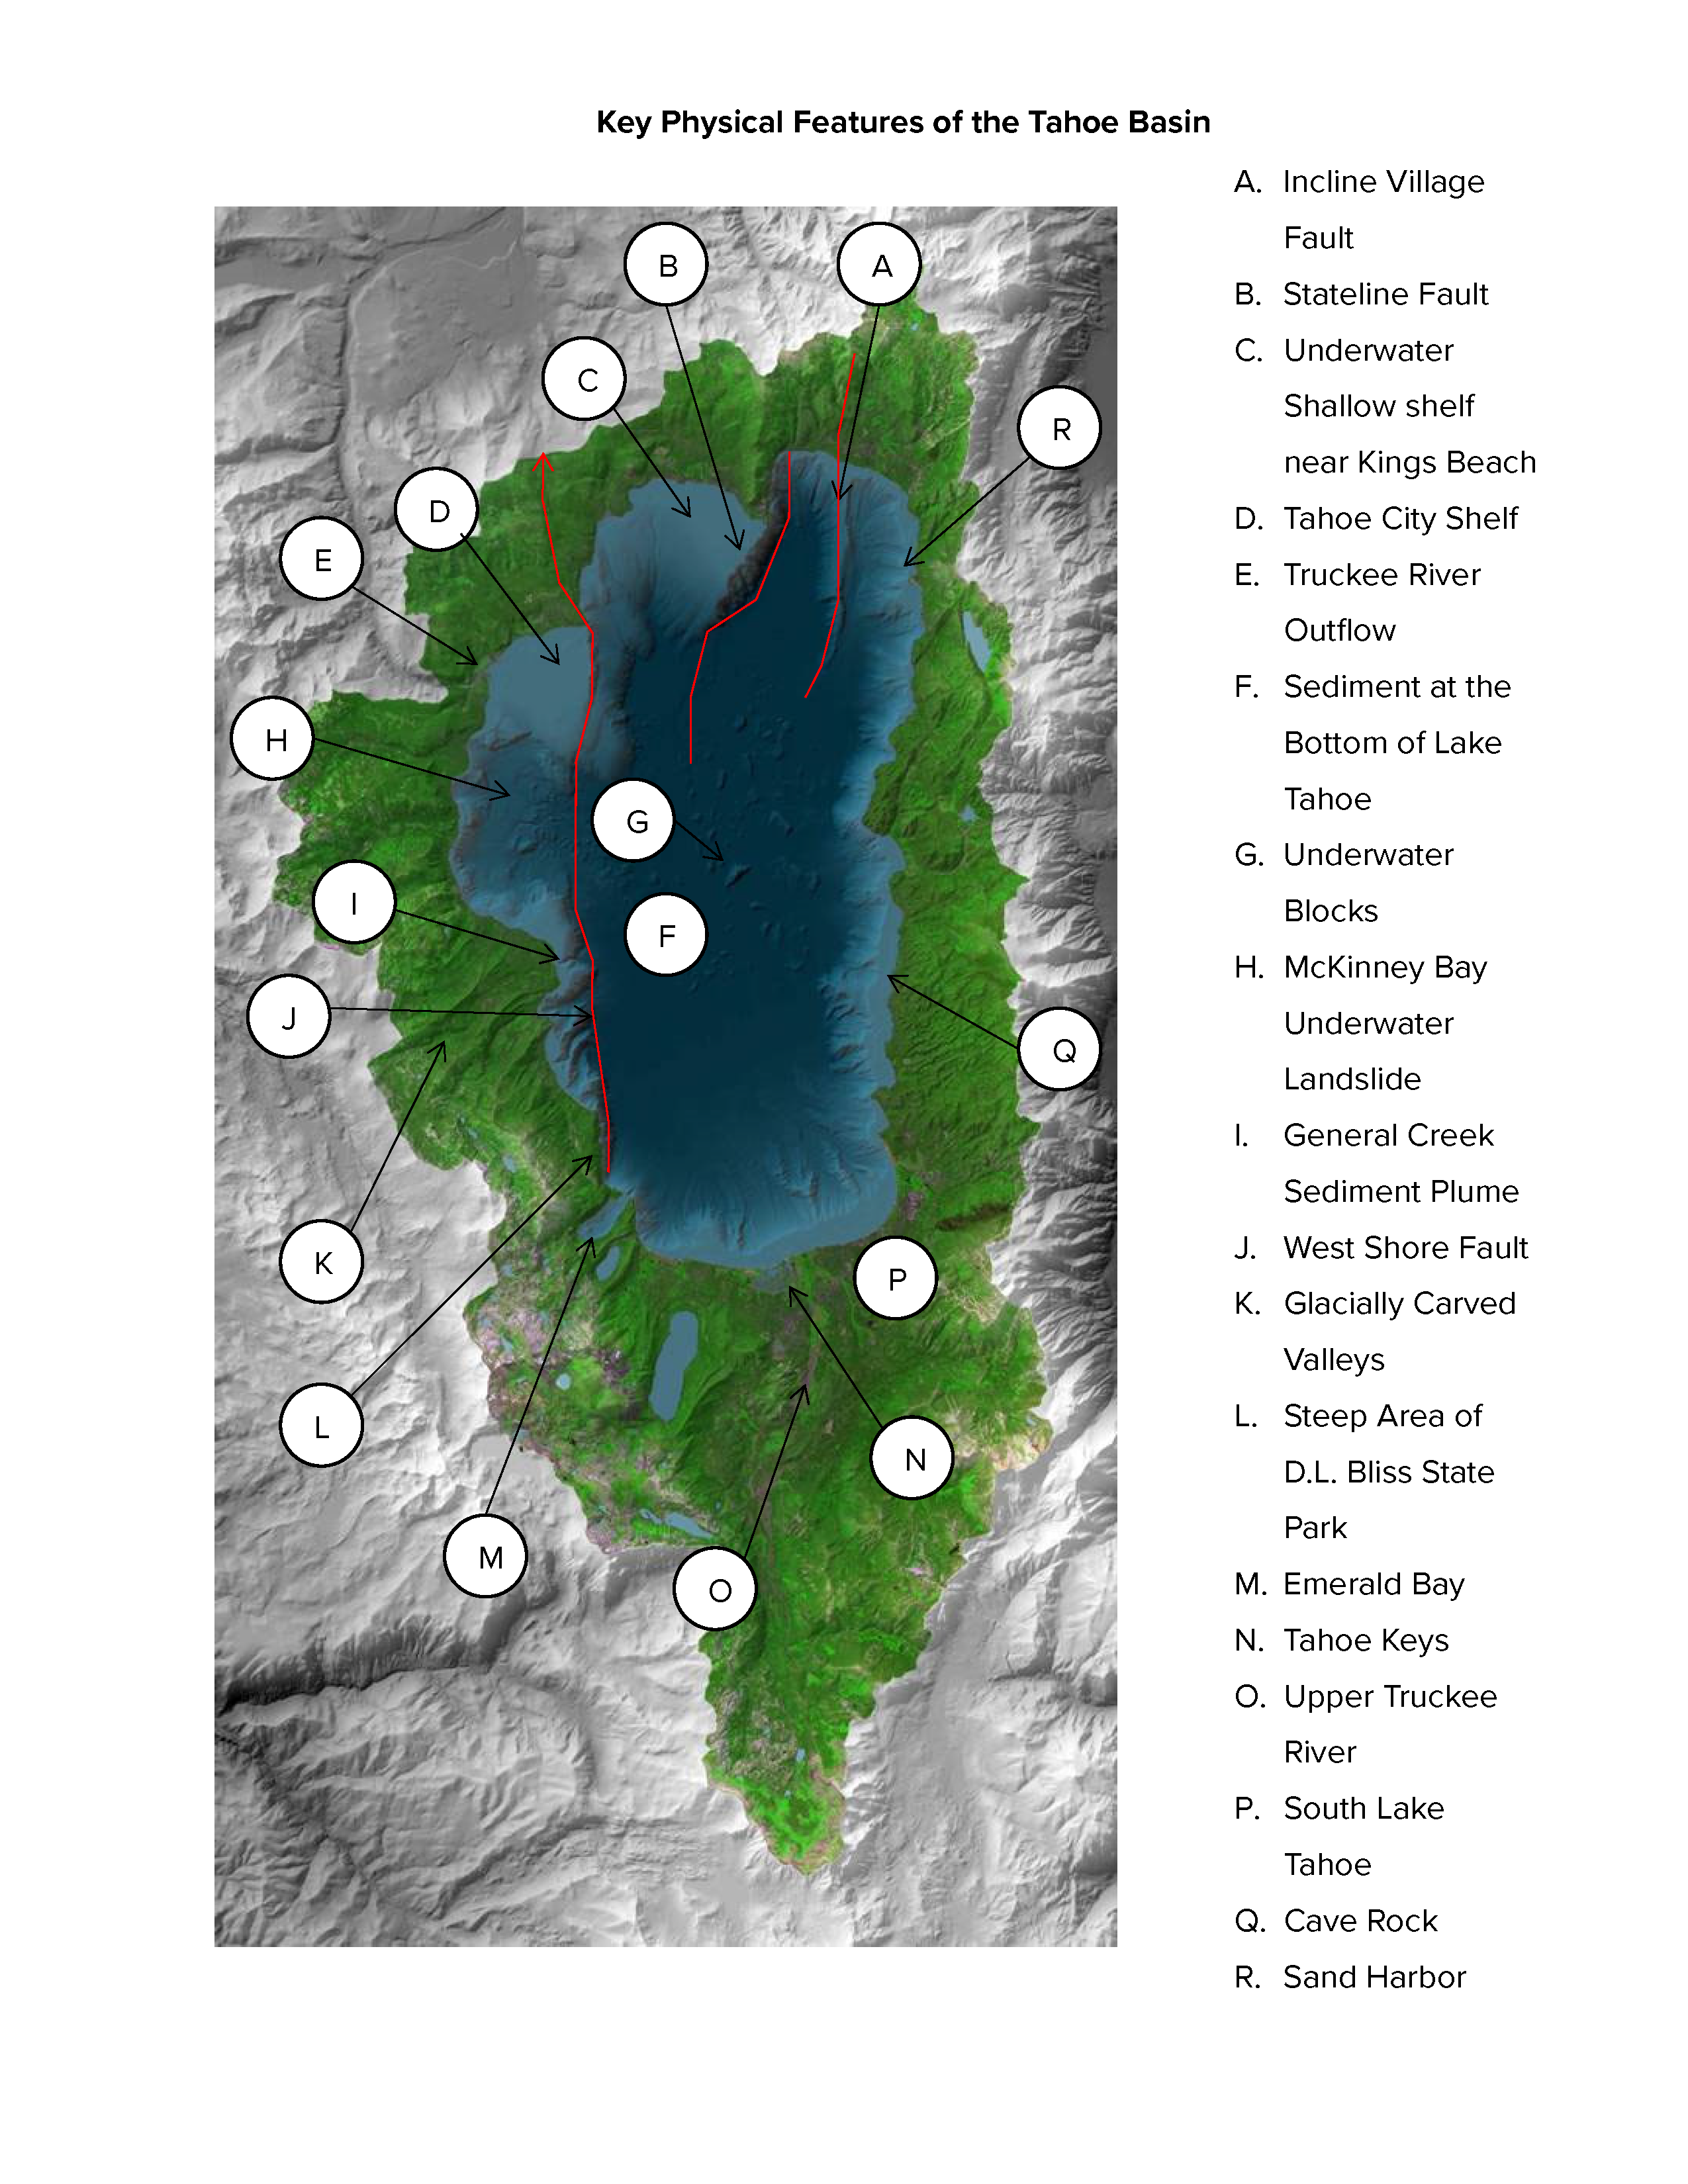 Points of interest in the Tahoe Basin